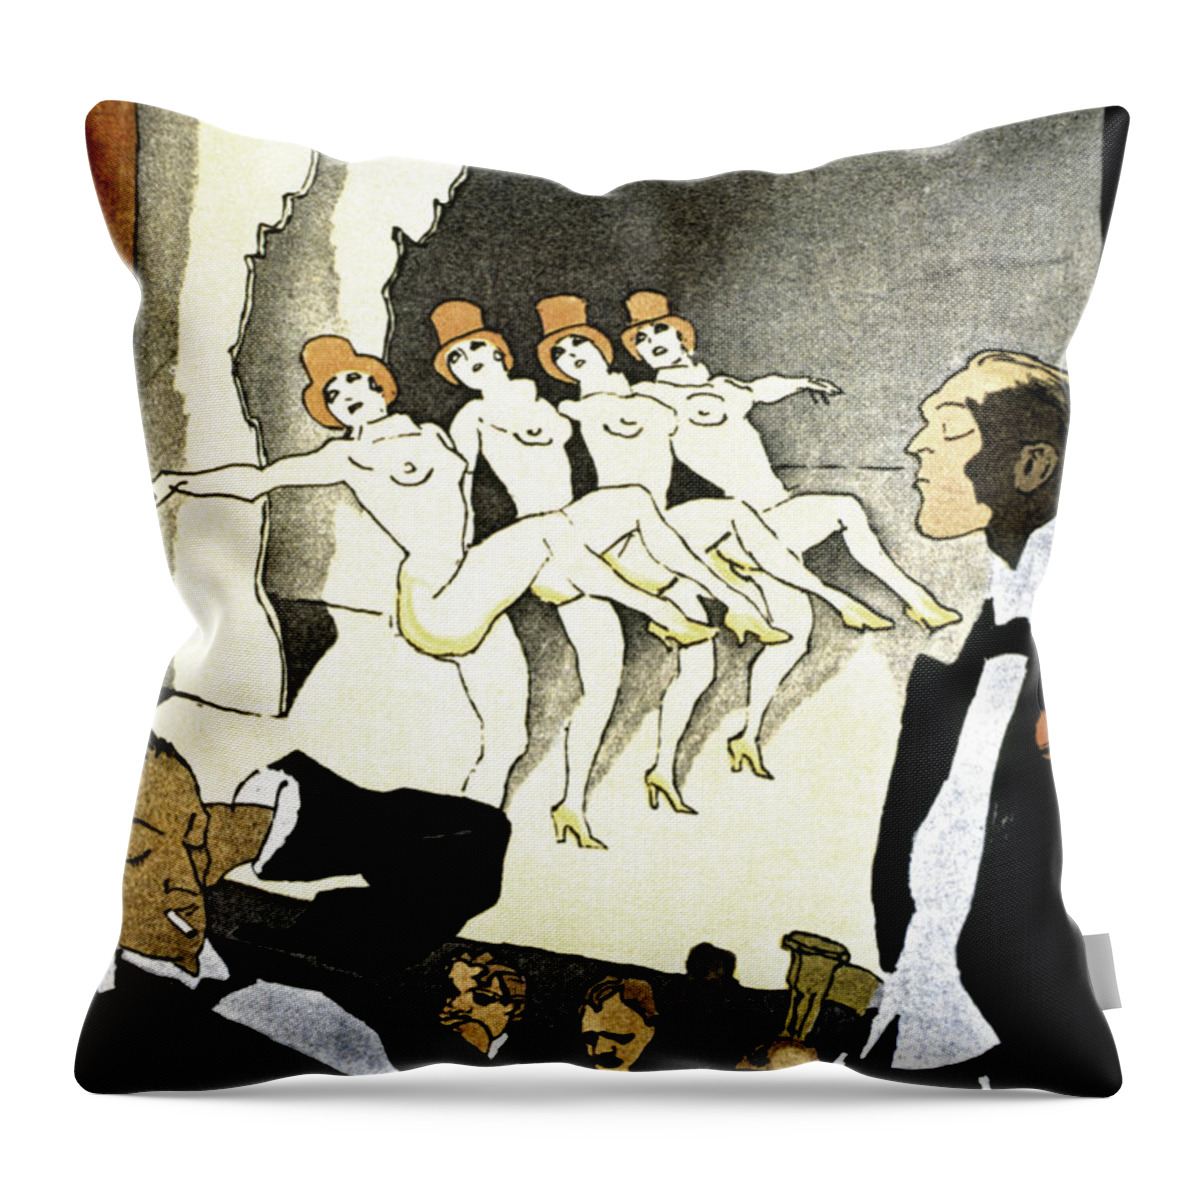 1926 Throw Pillow featuring the painting Thony: Nacktkultur, 1926 by Granger